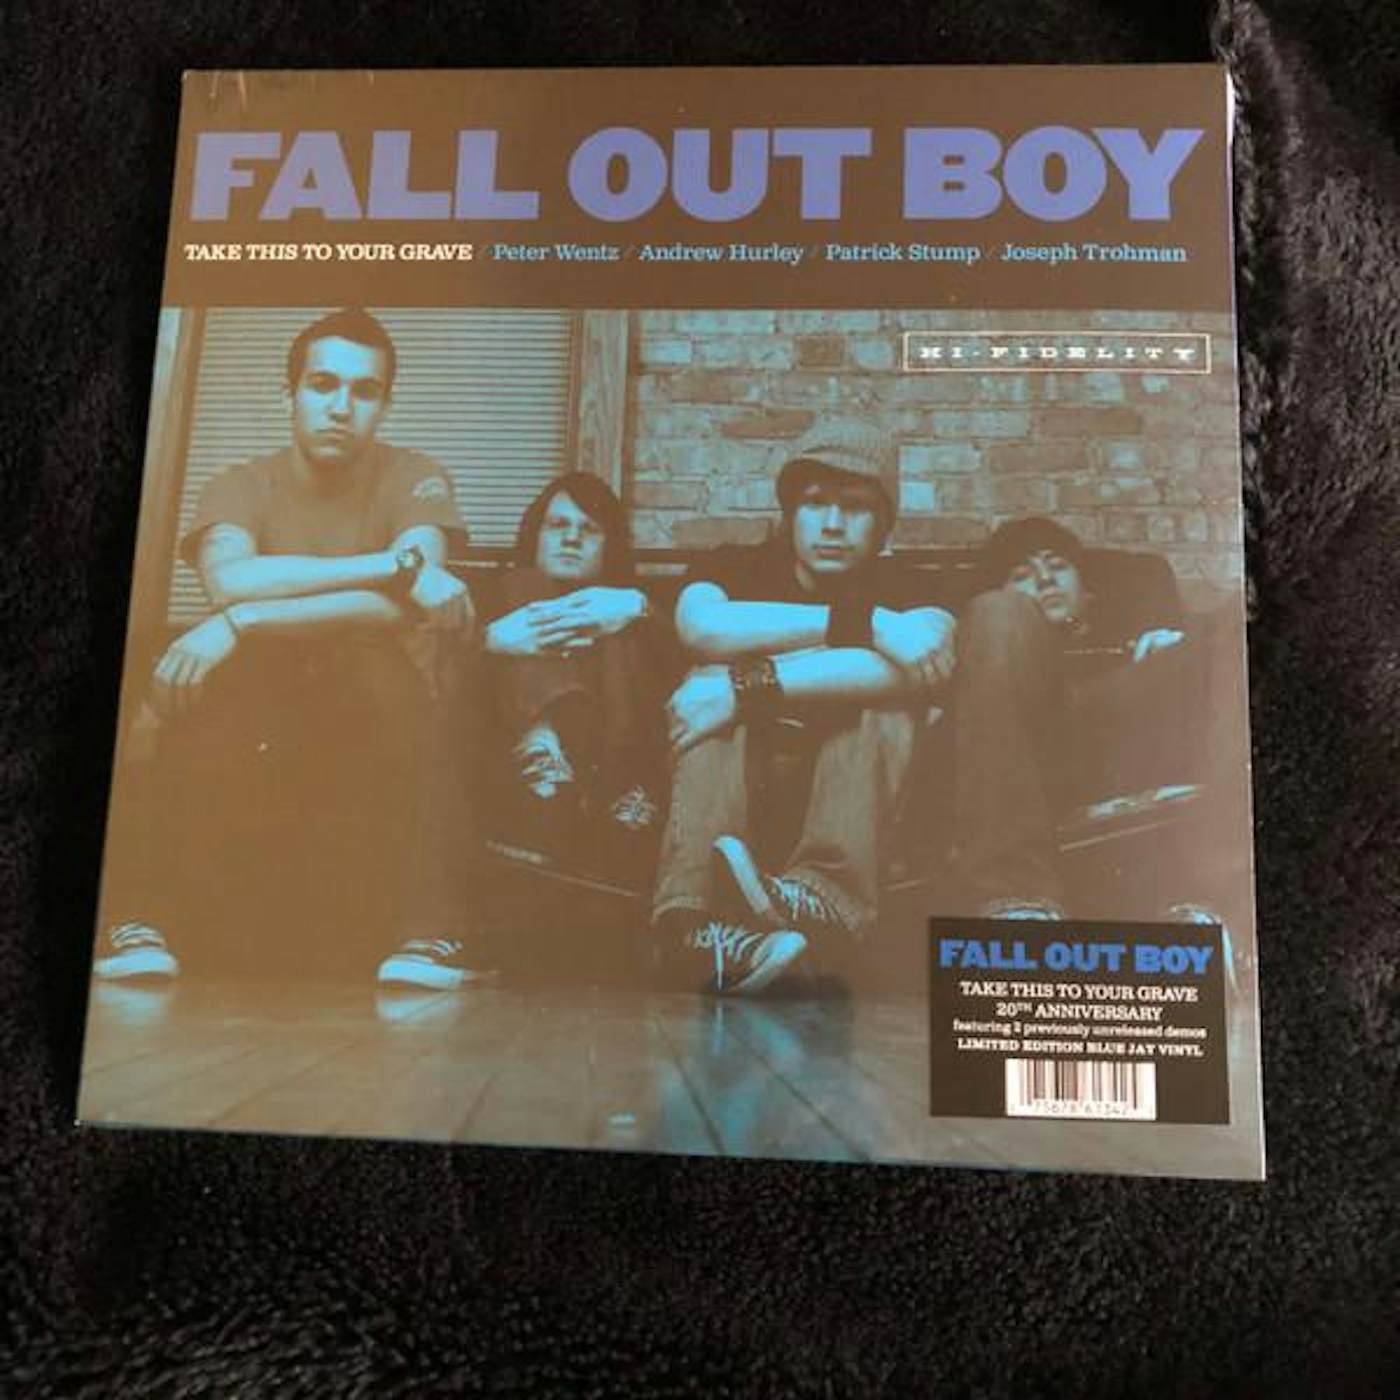 Fall Out Boy TAKE THIS TO YOUR GRAVE (20TH ANNIVERSARY/BLUE JAY VINYL) Vinyl Record